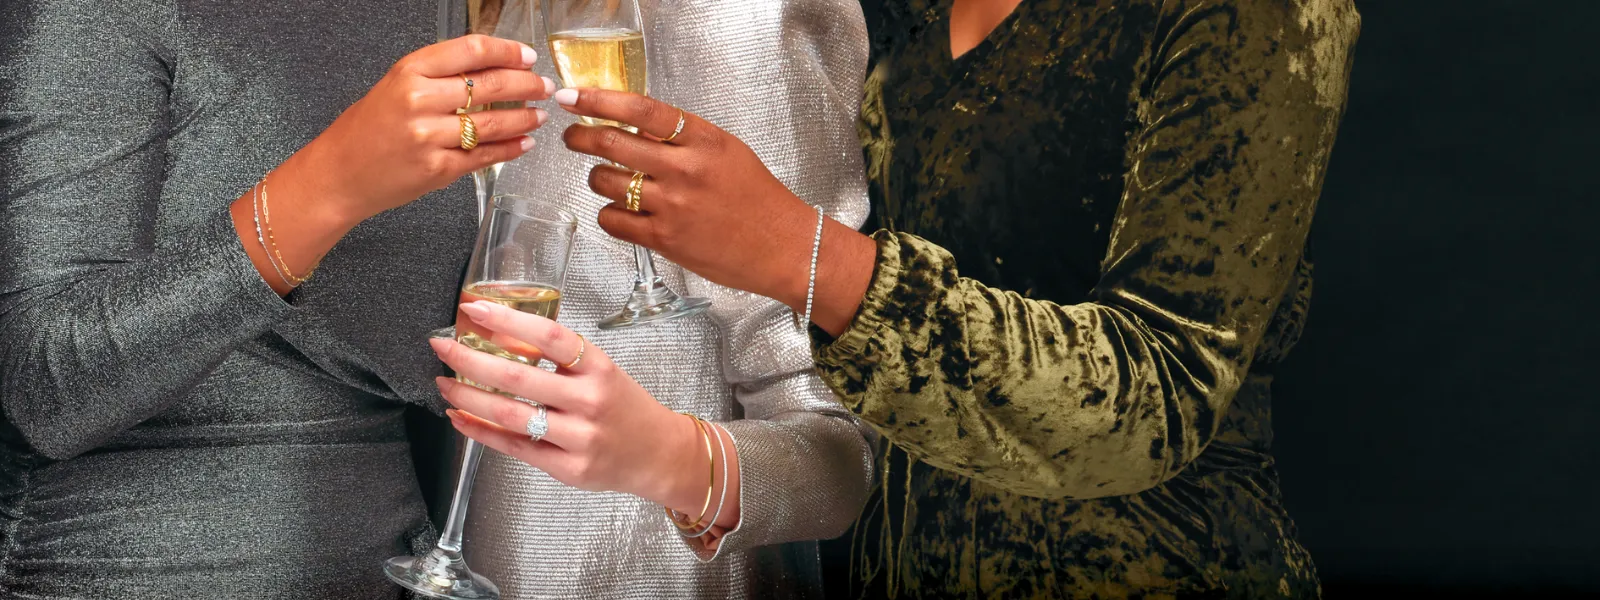 Women with diamond jewelry holding glasses of champagne